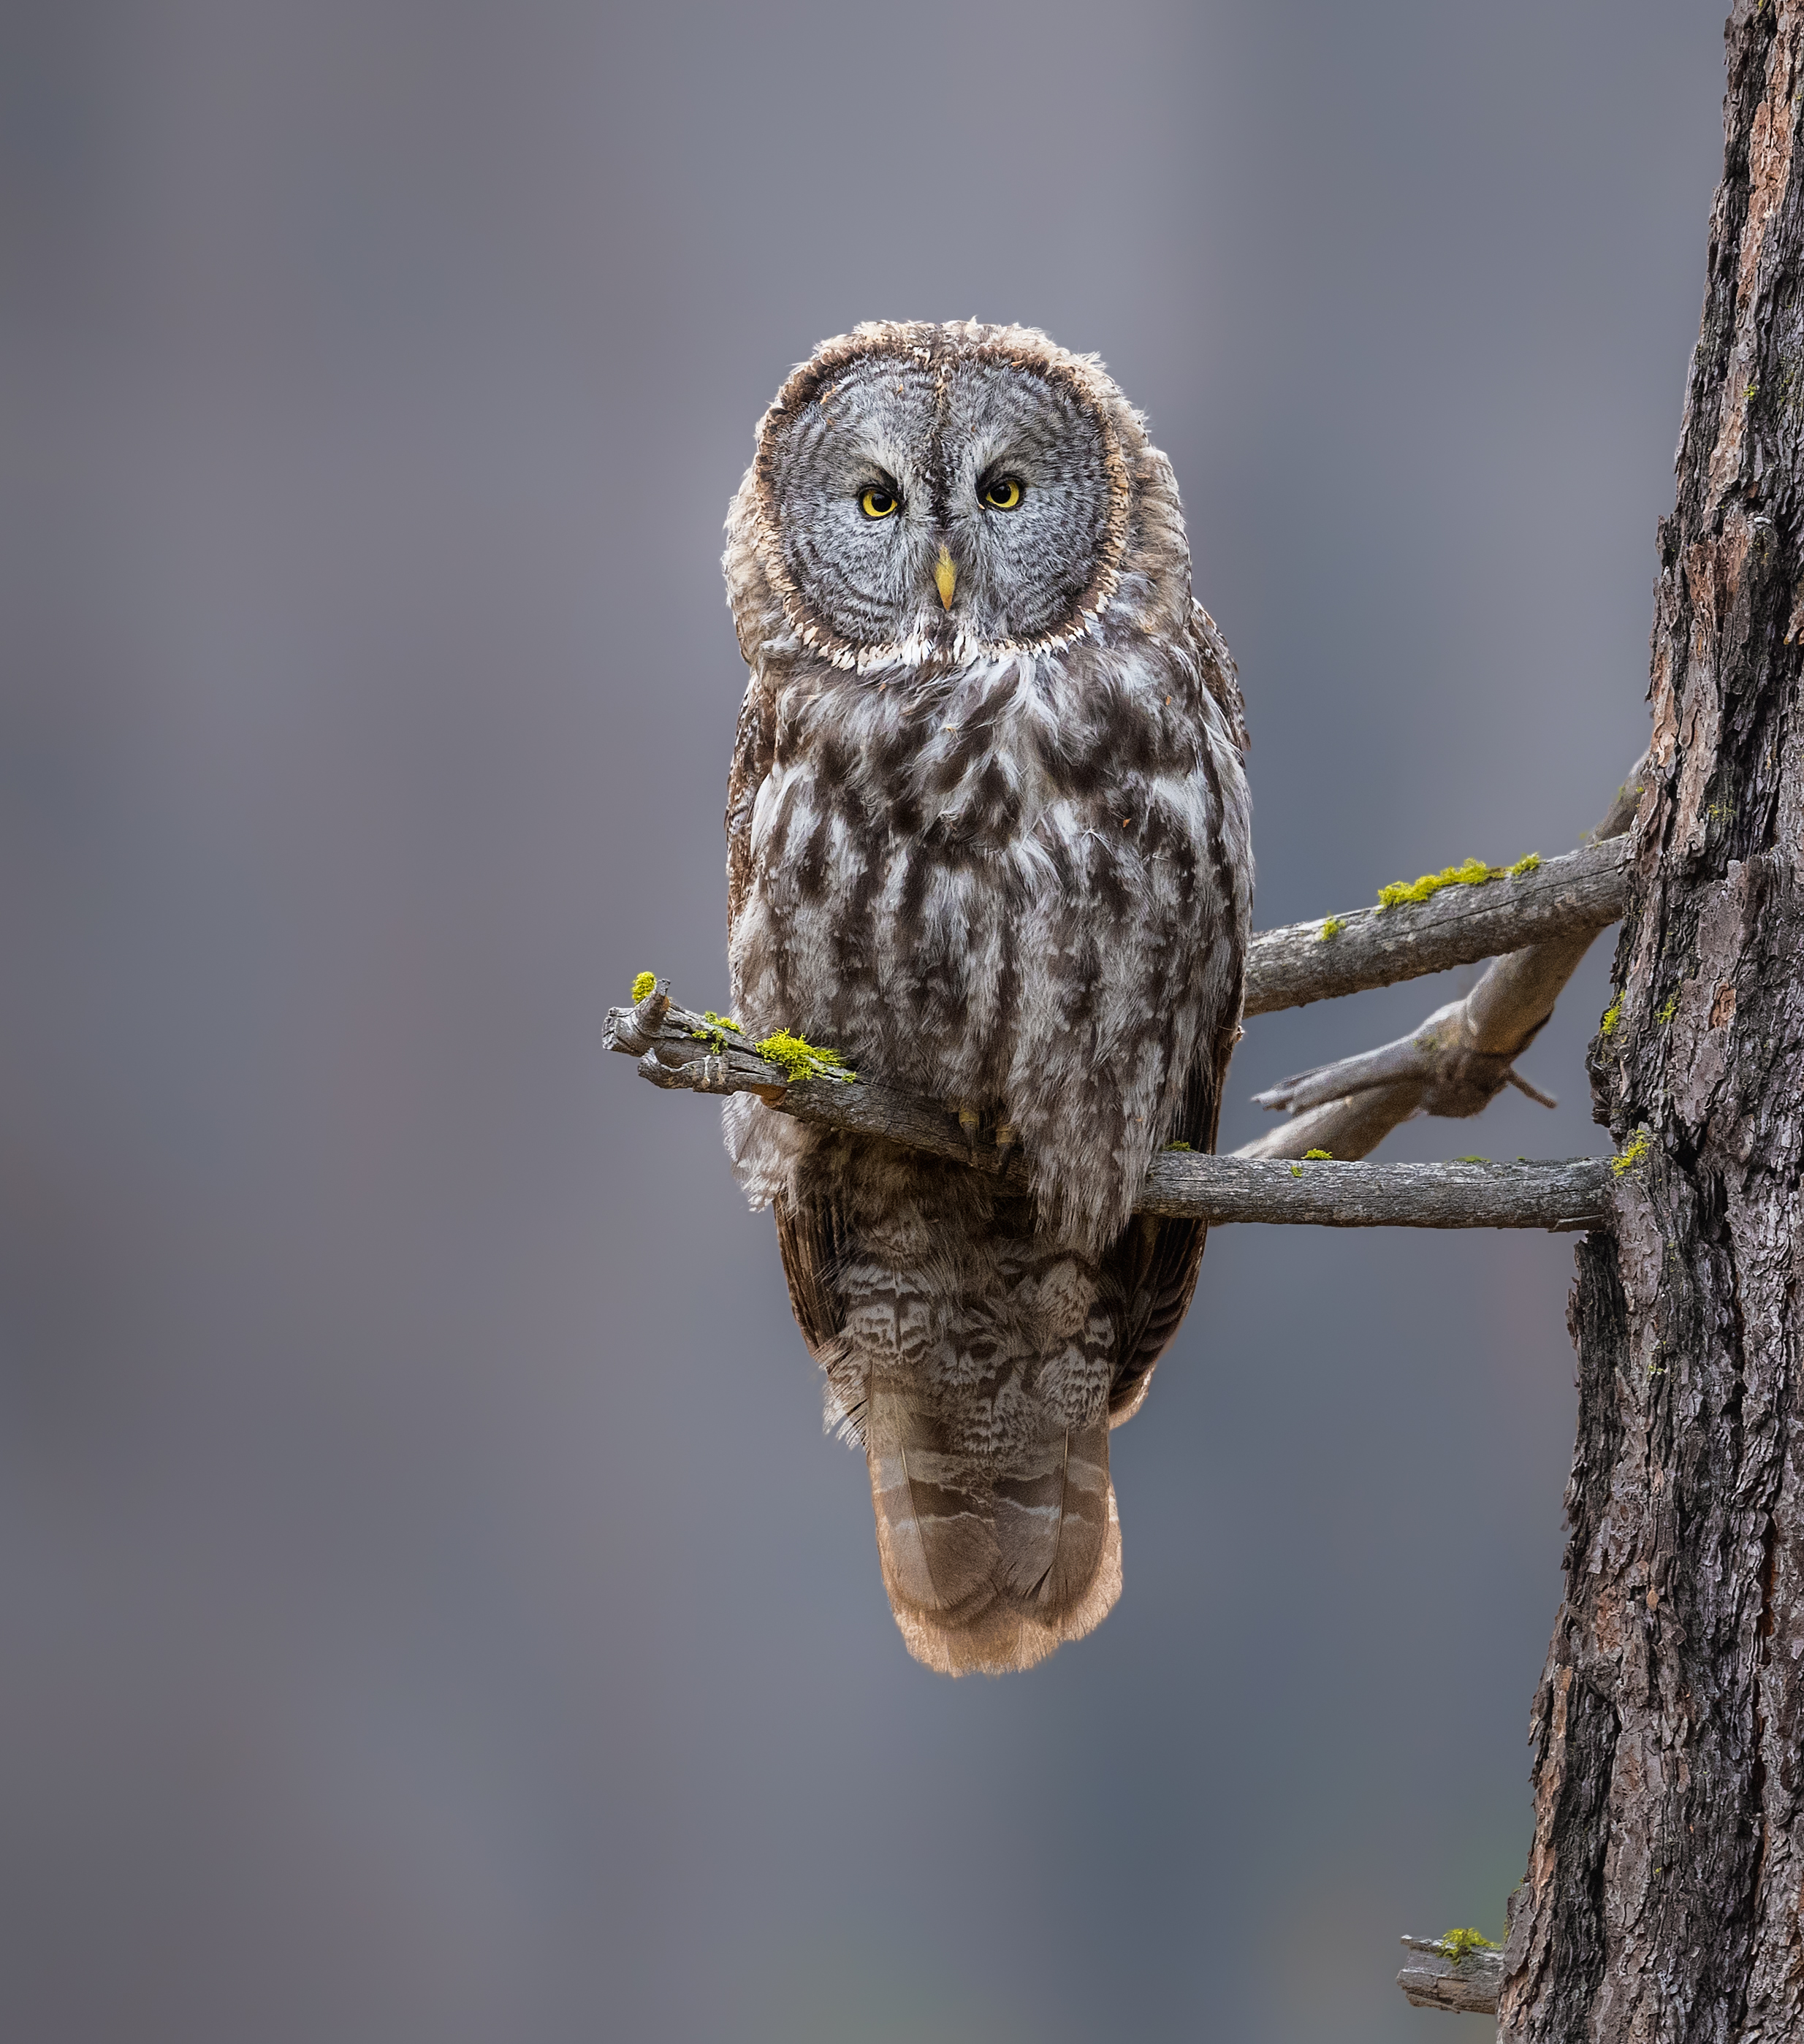 On a chilly fall morning, a pale colored great gray owl perches on an open branch.

In fall 2020, after a long week of school,...